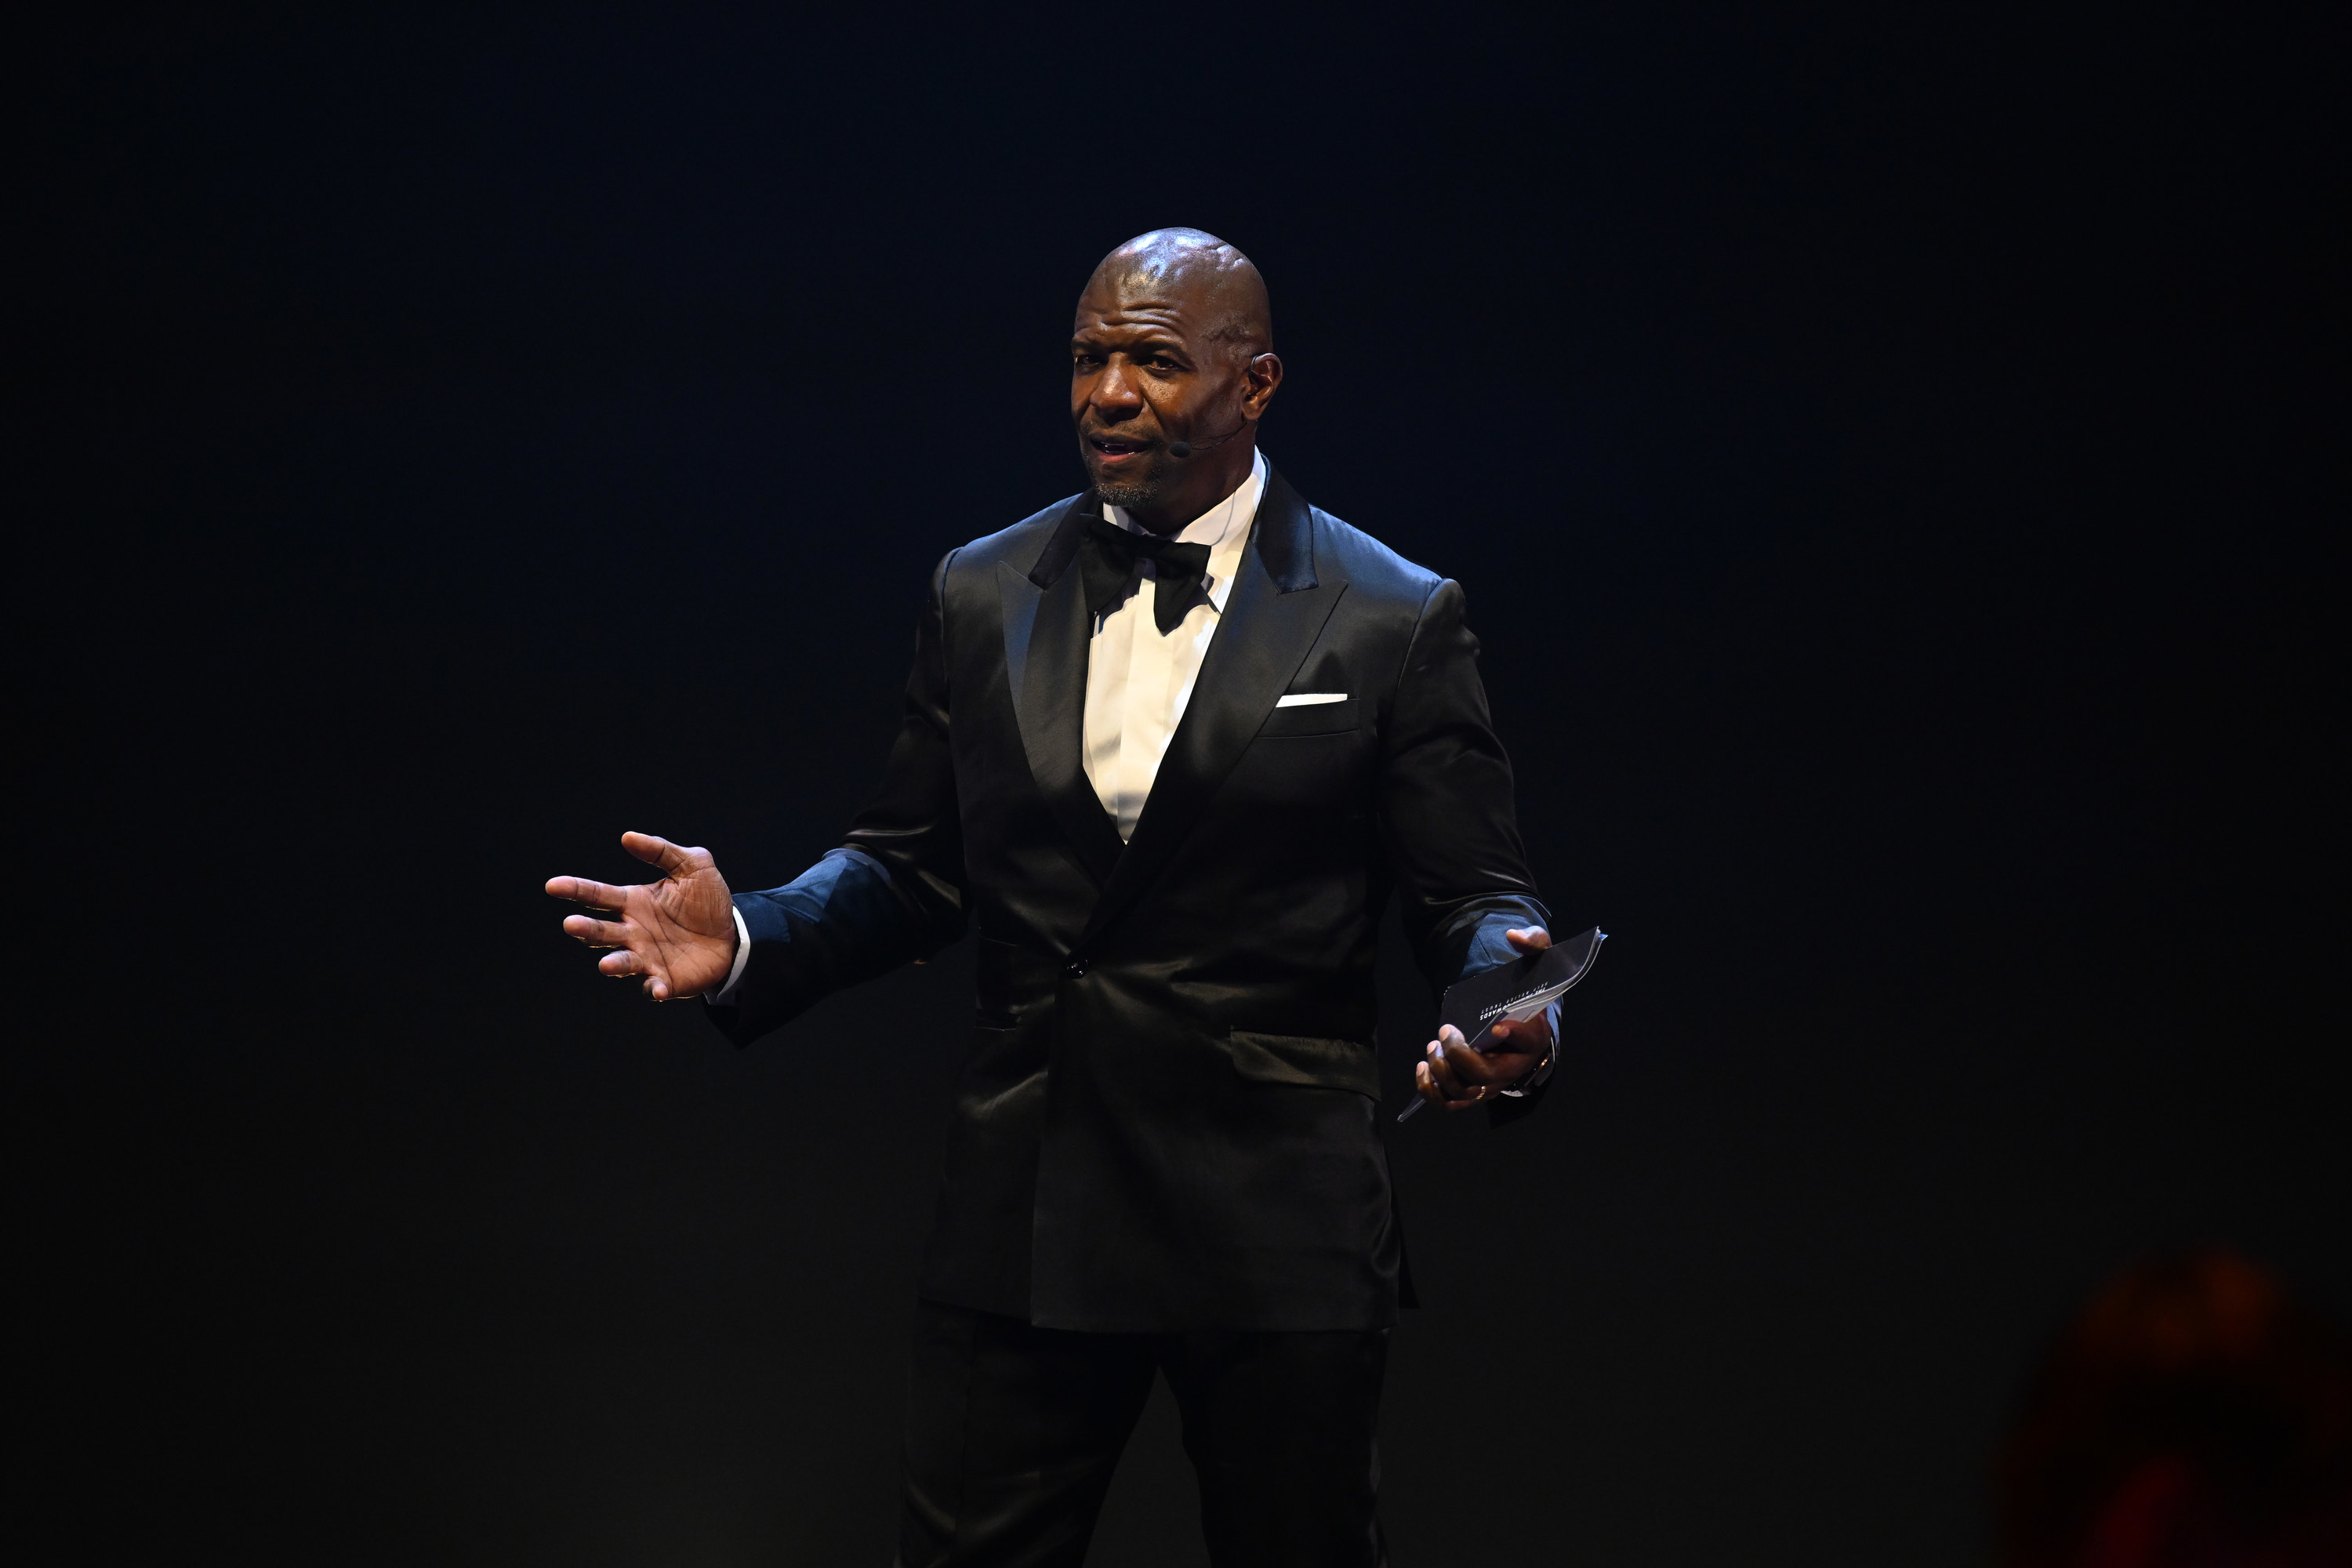 Terry Crews speaks on stage at the Jamal Edwards Self Belief Trust inaugural fundraiser on September 20, 2022